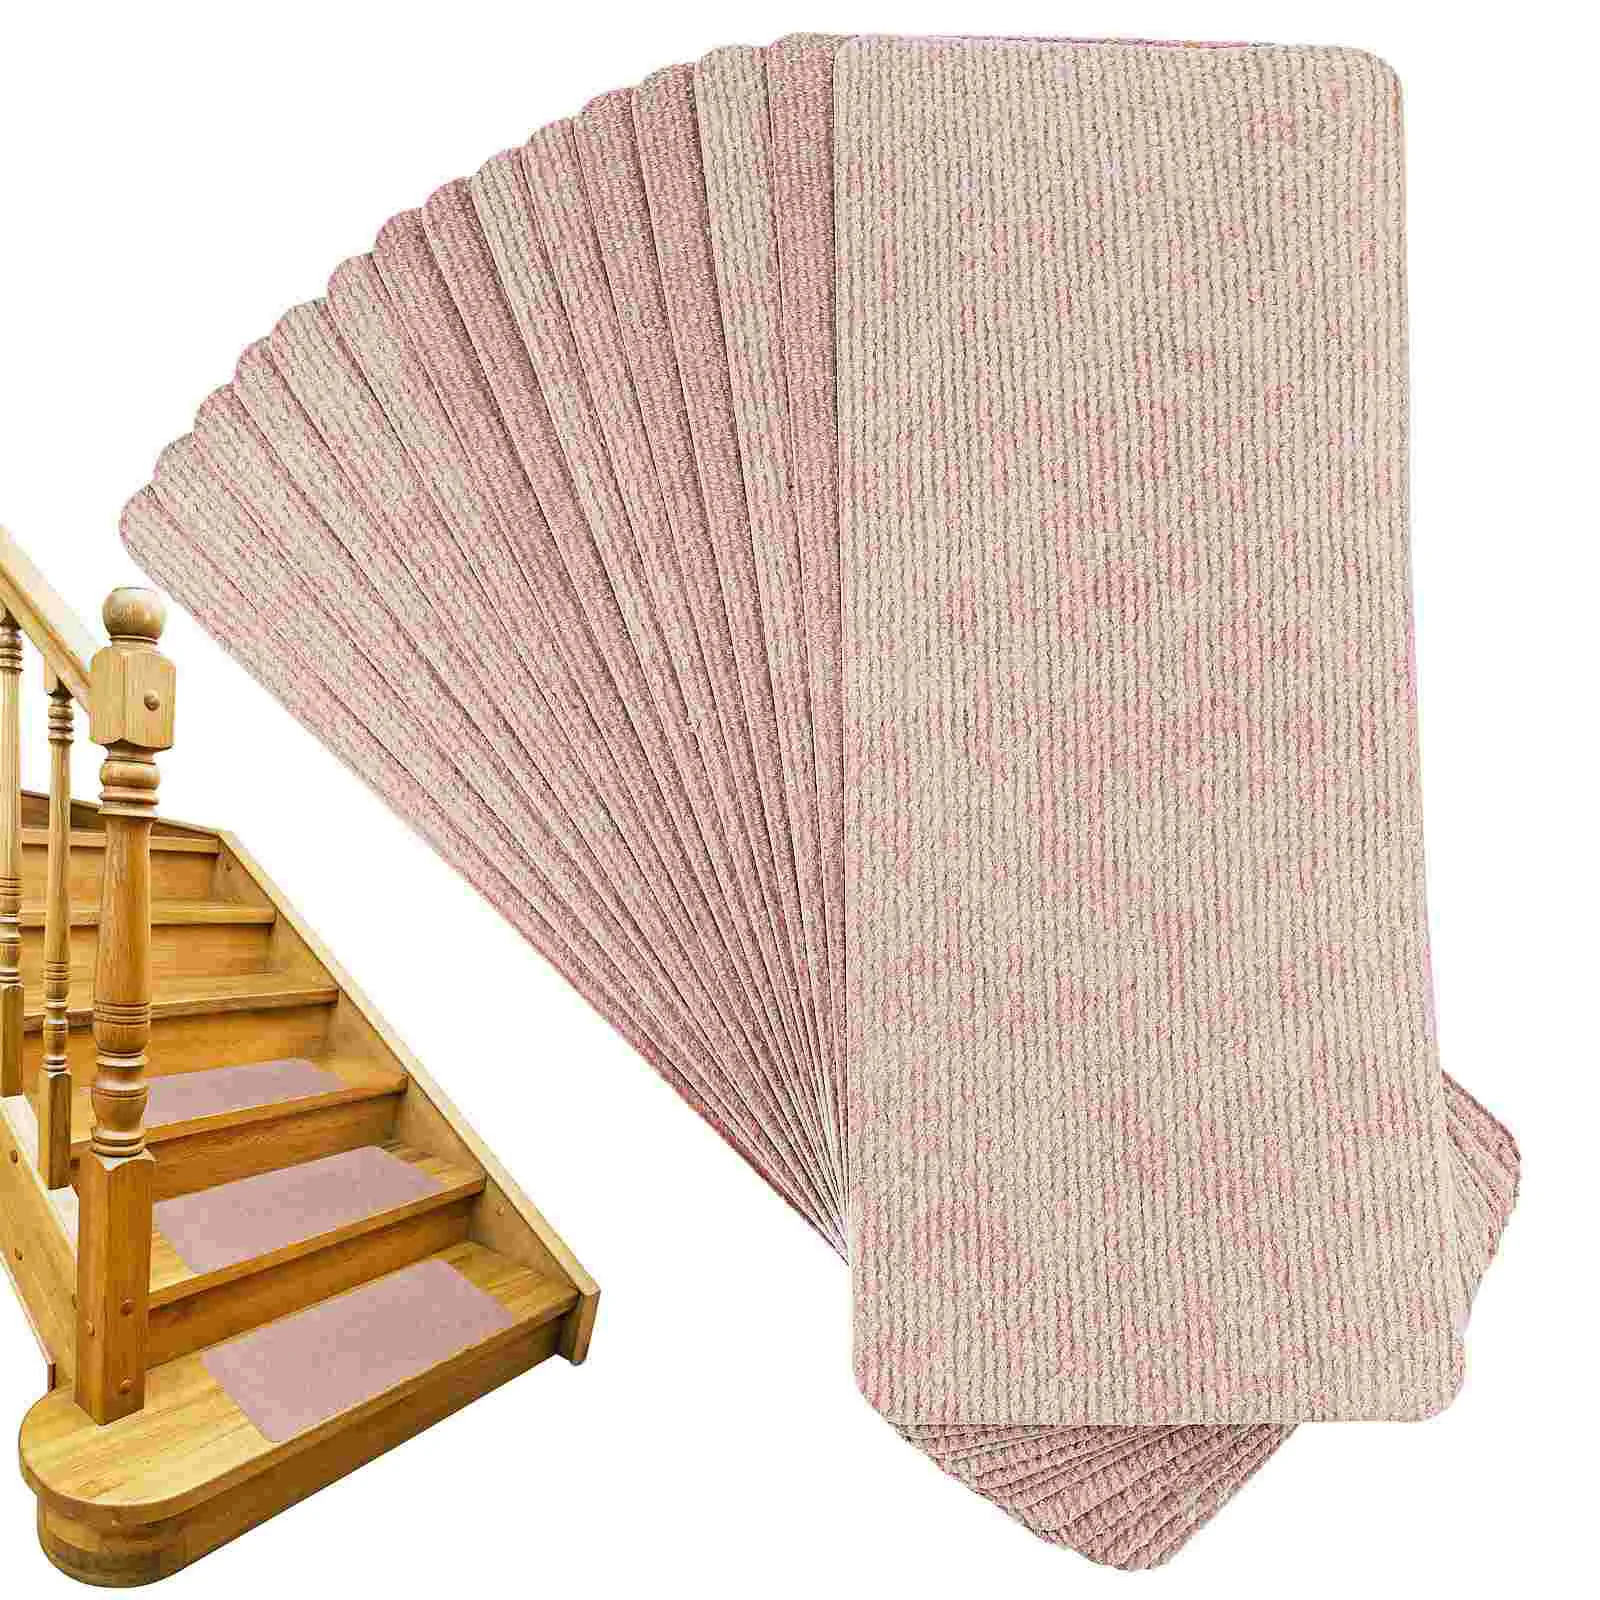 

Anti-slip Home Glue-free Floor Mat Self Adhesive Stair Pads Treads for Carpeted Stairs Indoor Mats Non Runner Rug Area Rugs